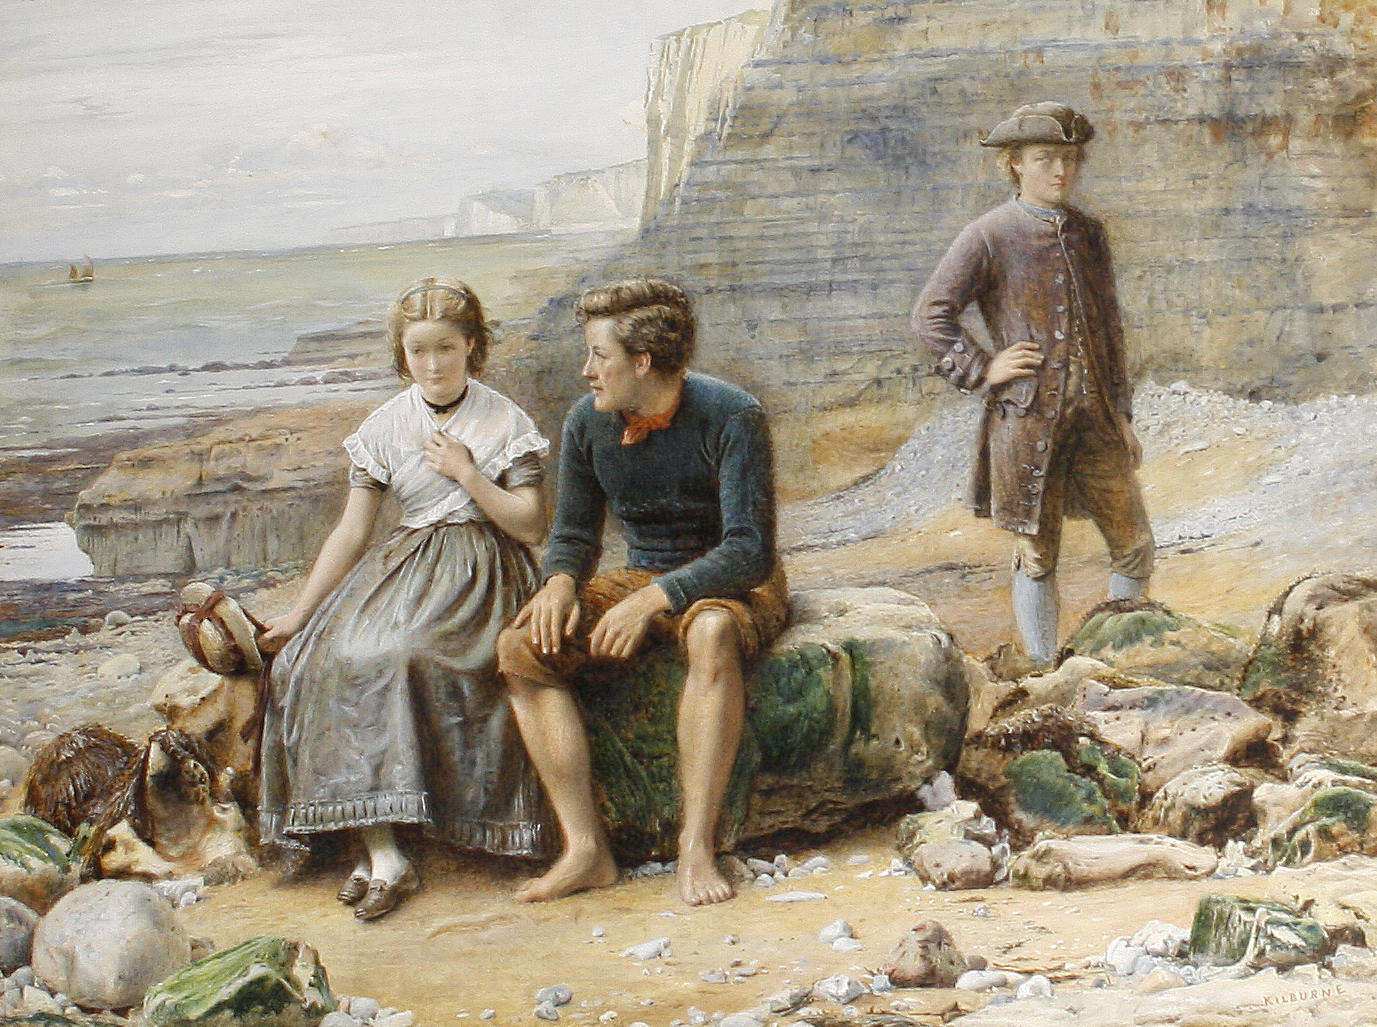 A watercolor painting of a girl and boy sitting on a rock by the sea as another man looks on.